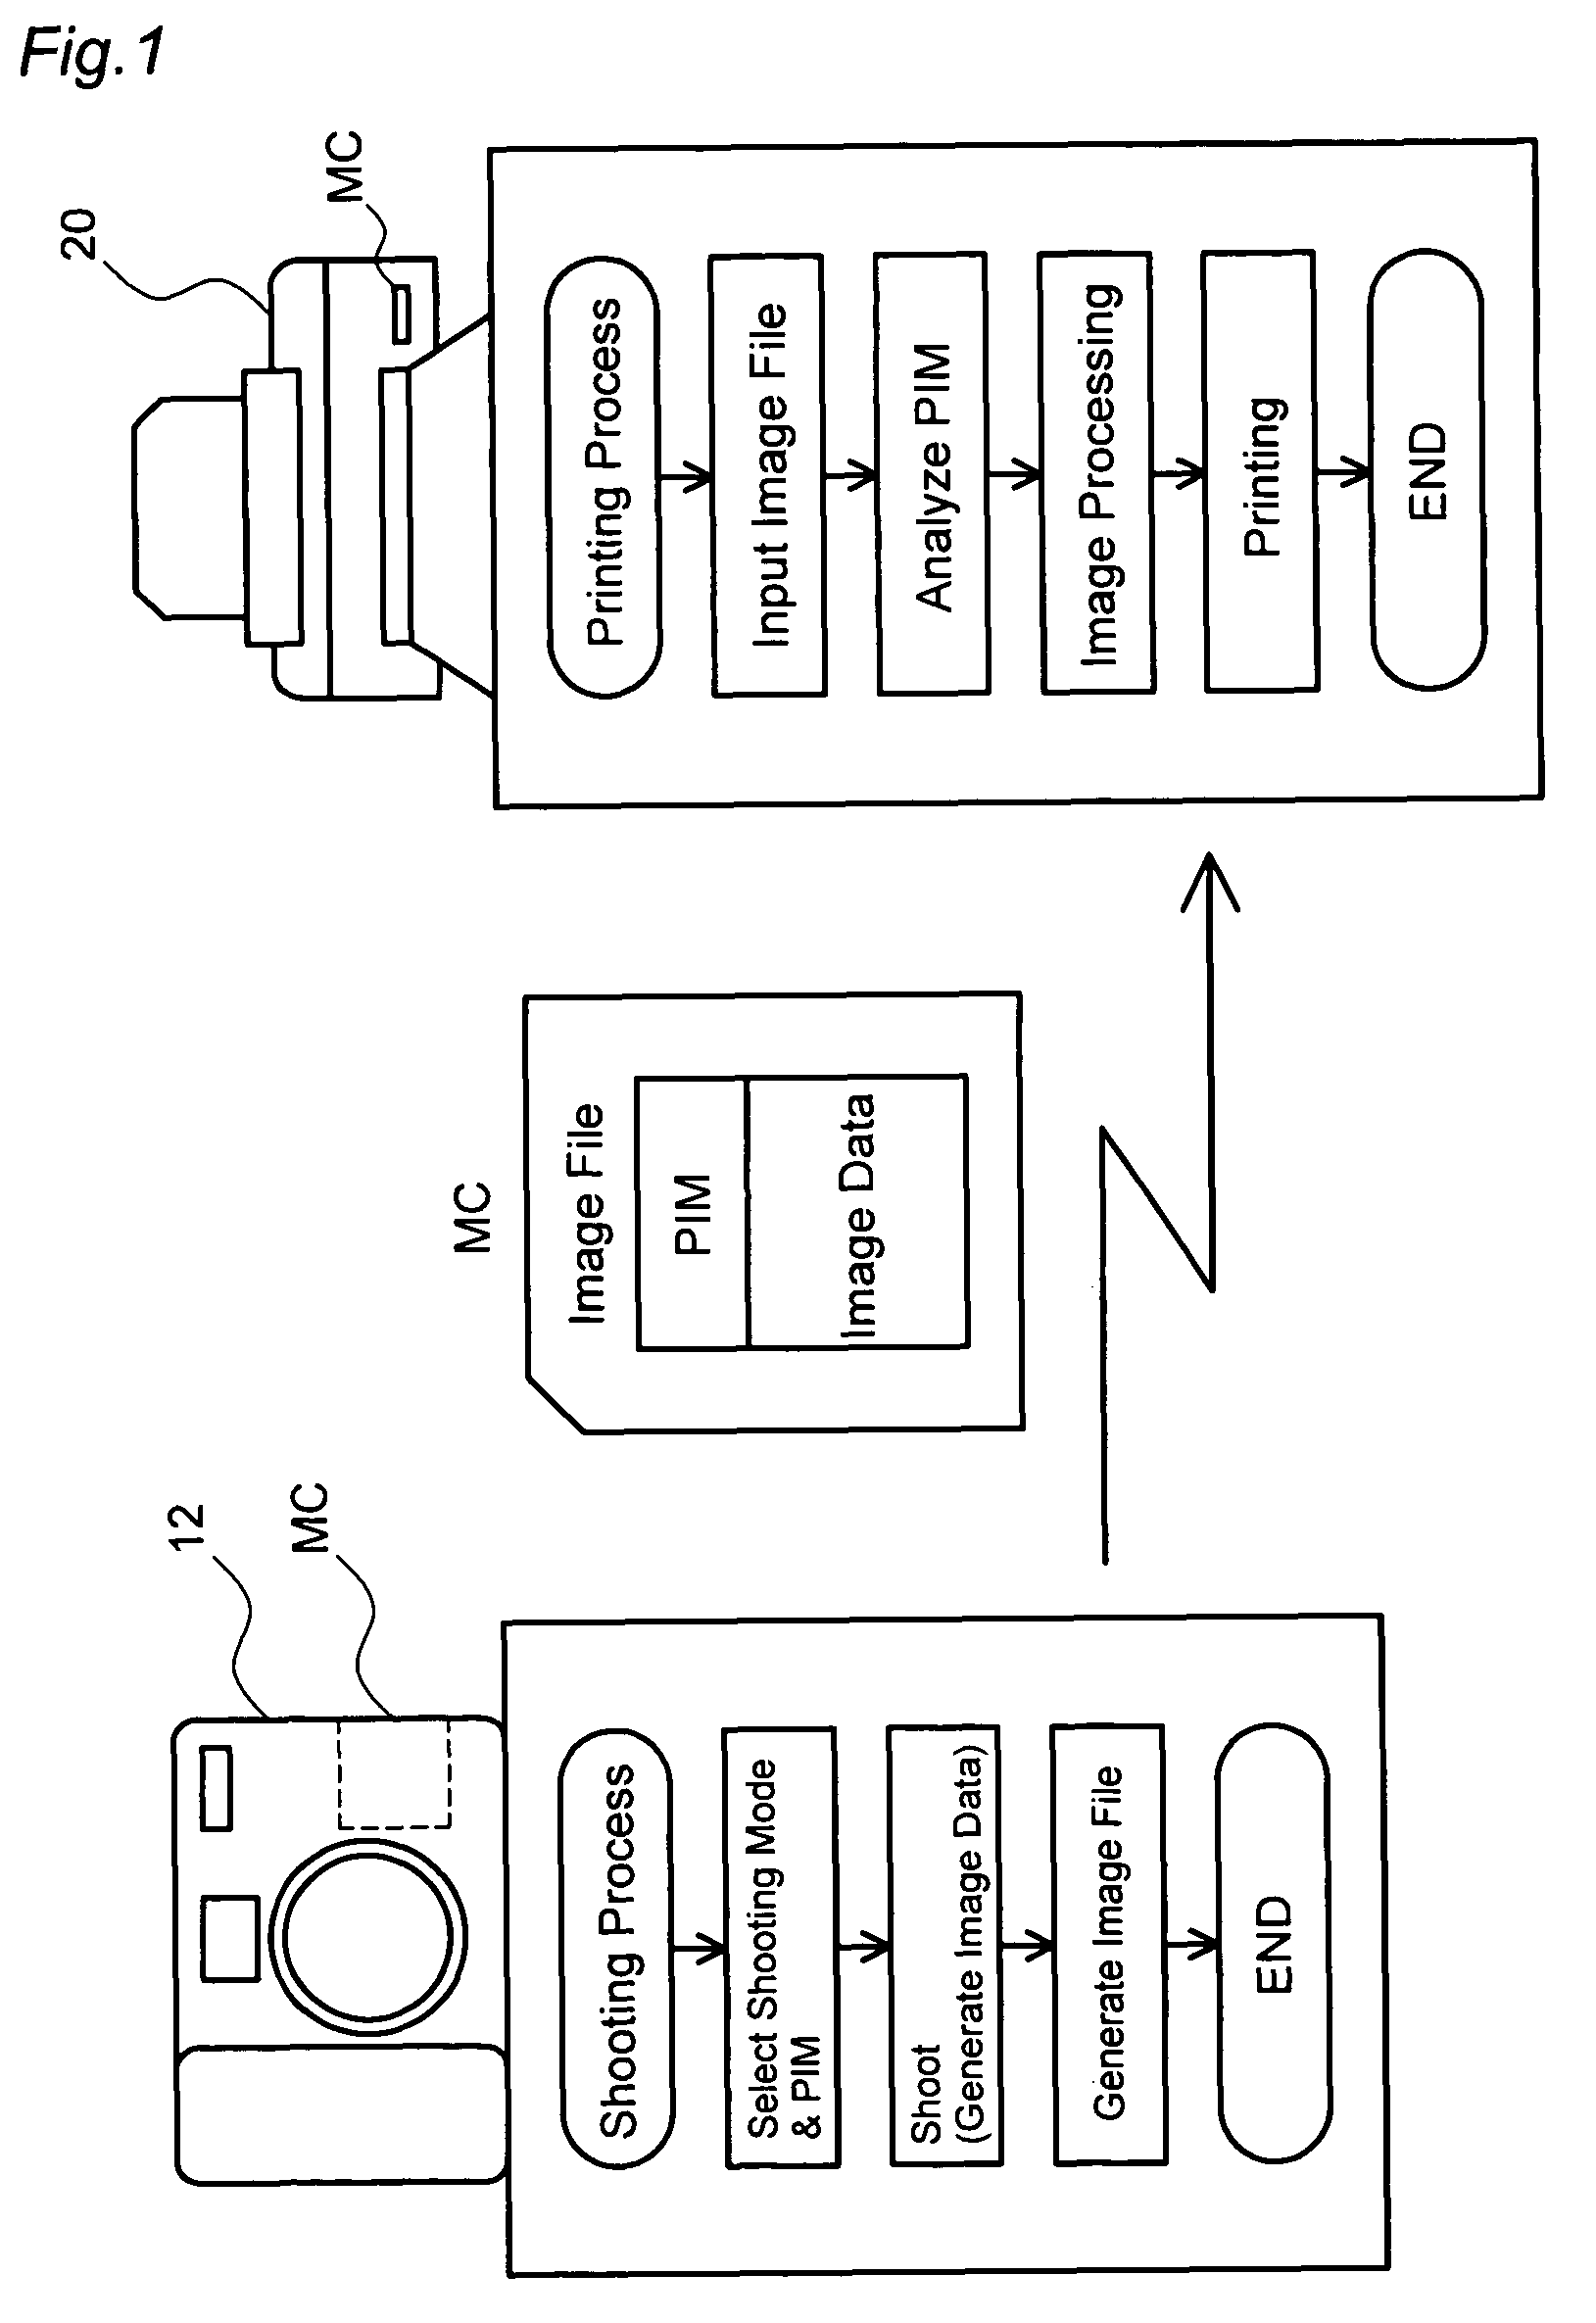 Image generation with integrating control data